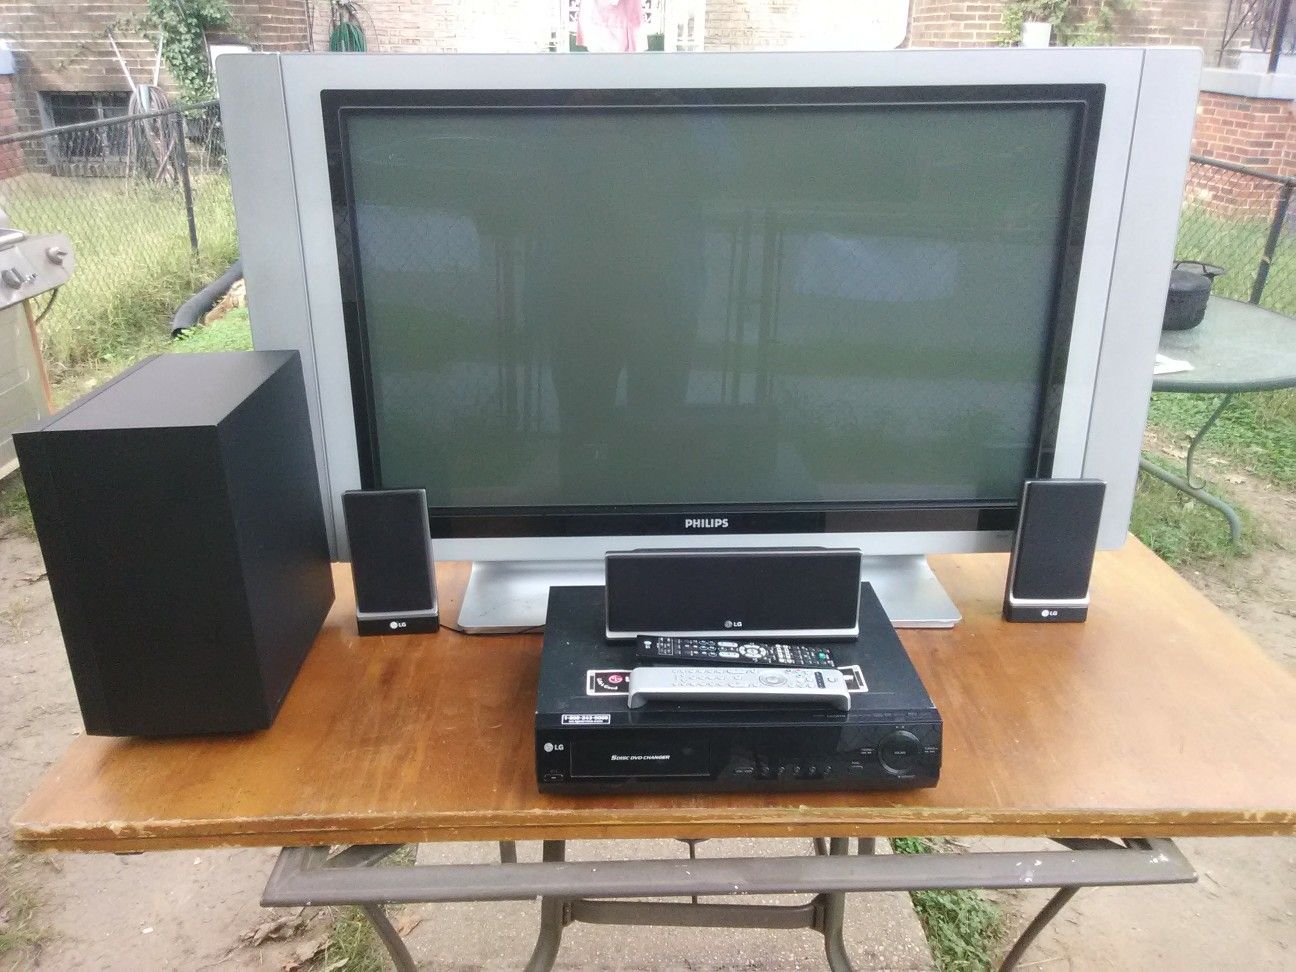 Phillips and LG Home theater system